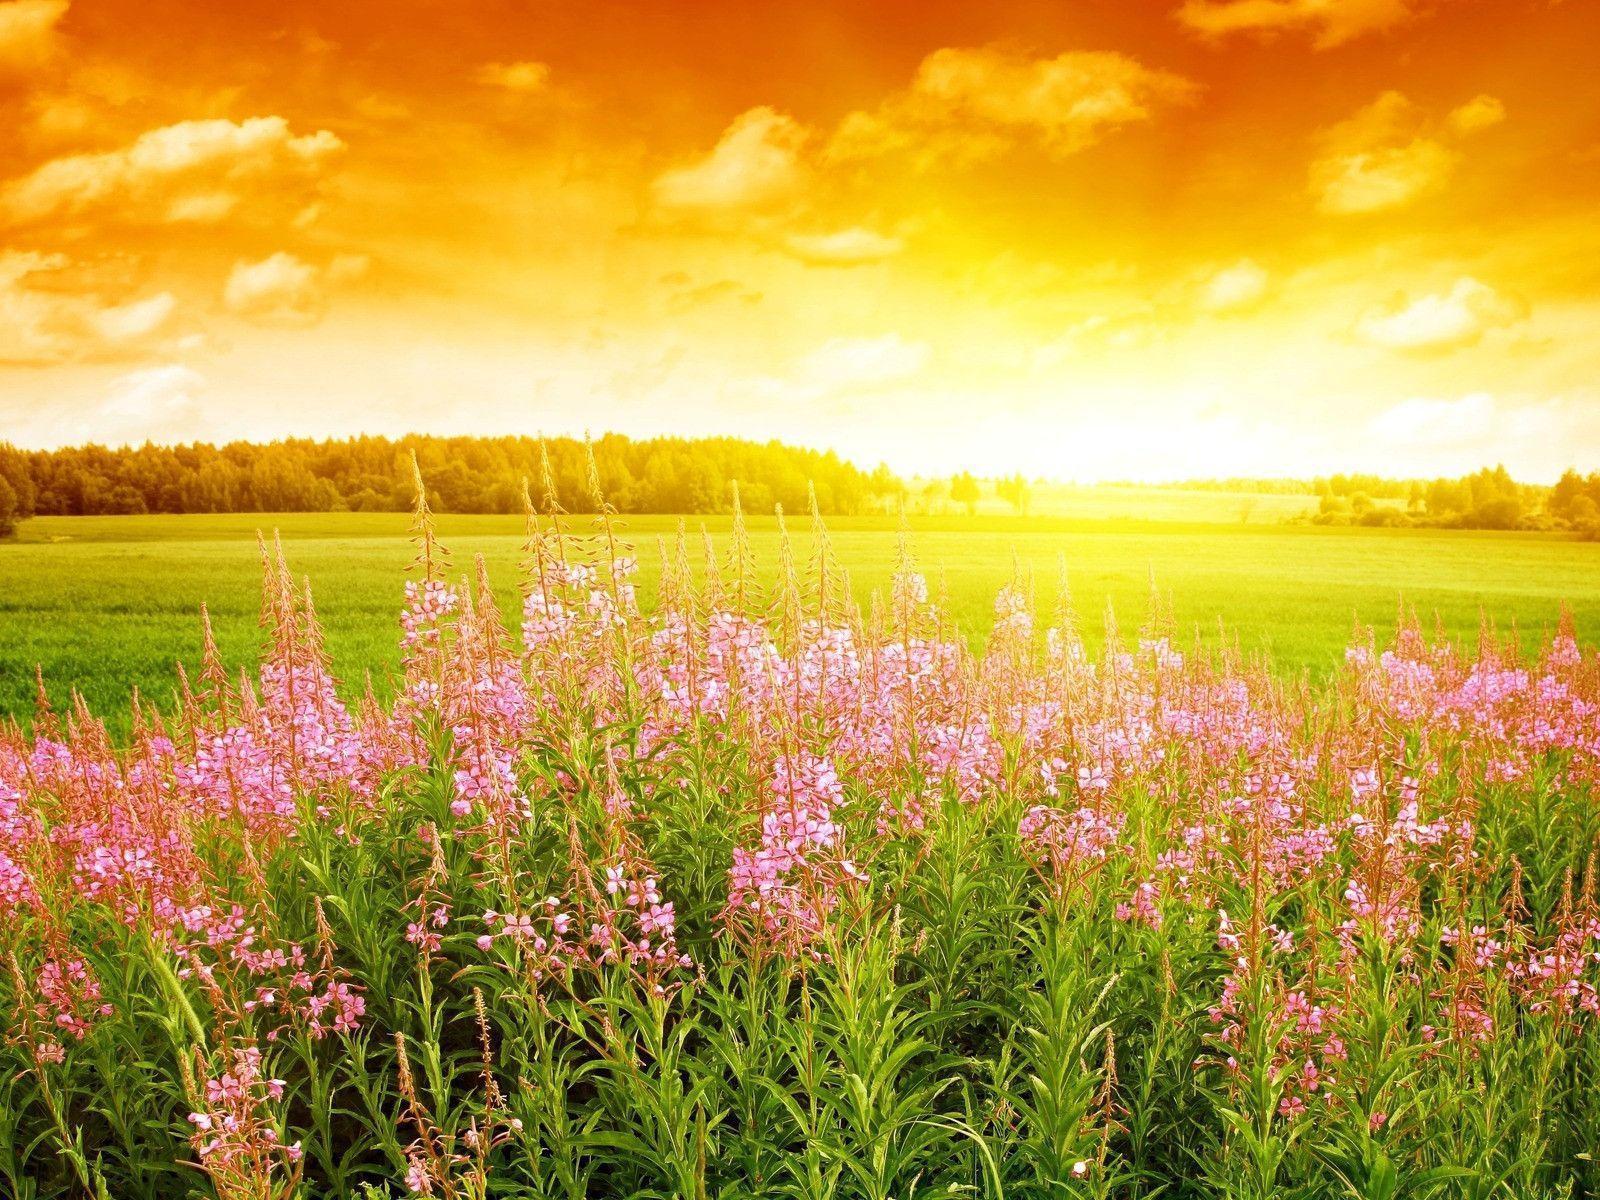 Summer Flowers Background HD Image 3 HD Wallpaper. Hdimges